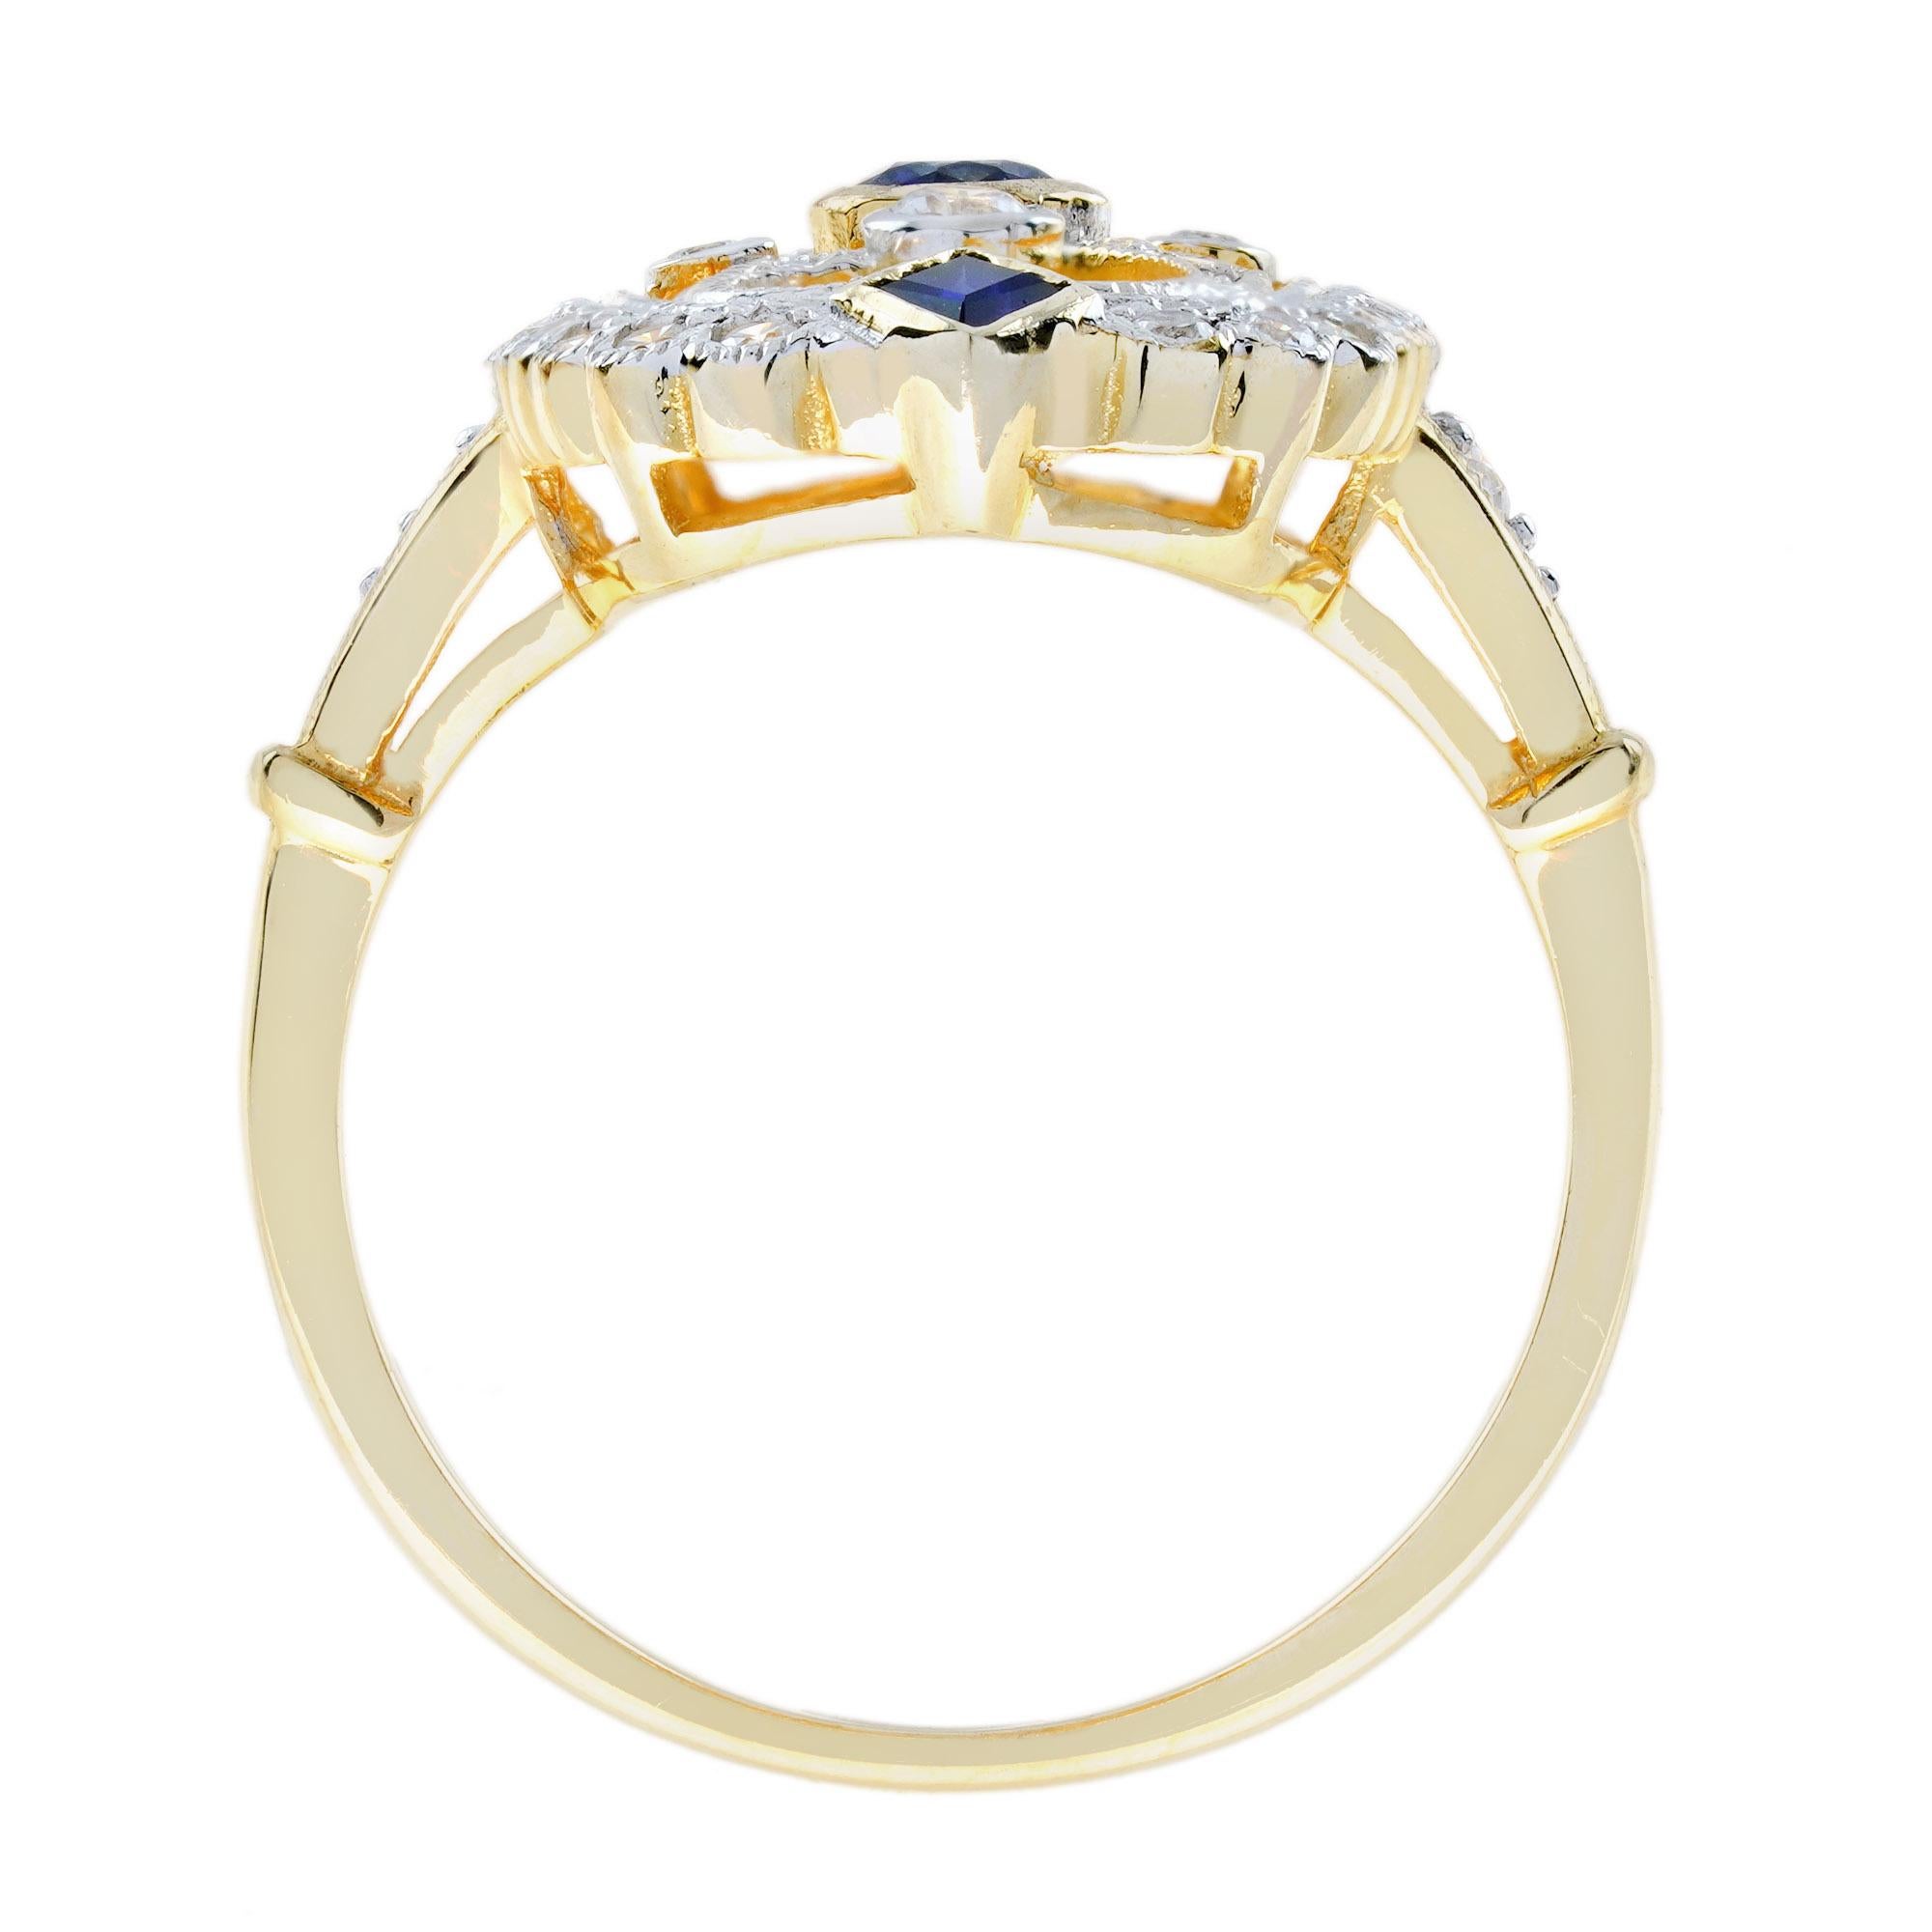 For Sale:  Blue Sapphire and Diamond Vintage Style Filigree Ring in 14K Two Tone Gold 6